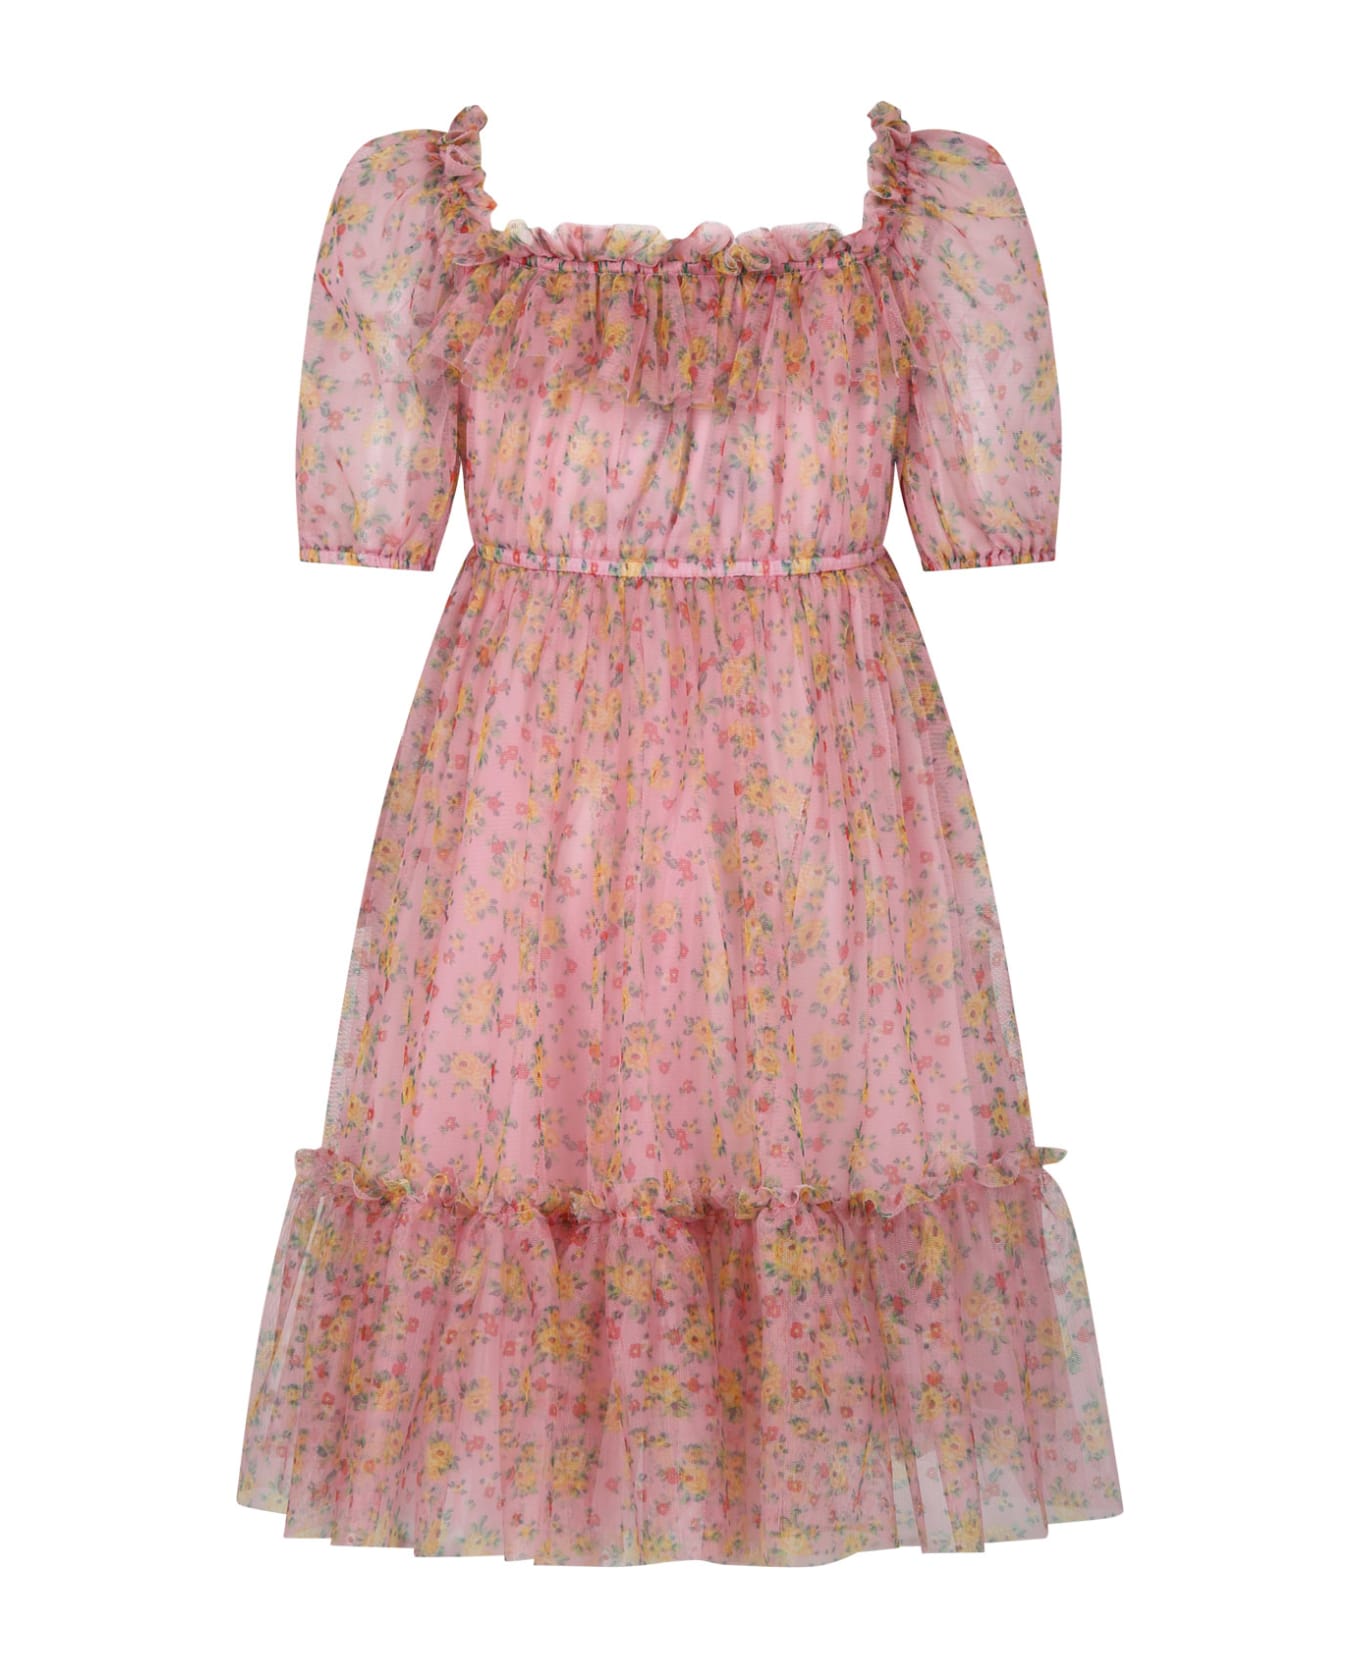 Philosophy di Lorenzo Serafini Kids Pink Dress For Girl With Floral Print - Multicolor